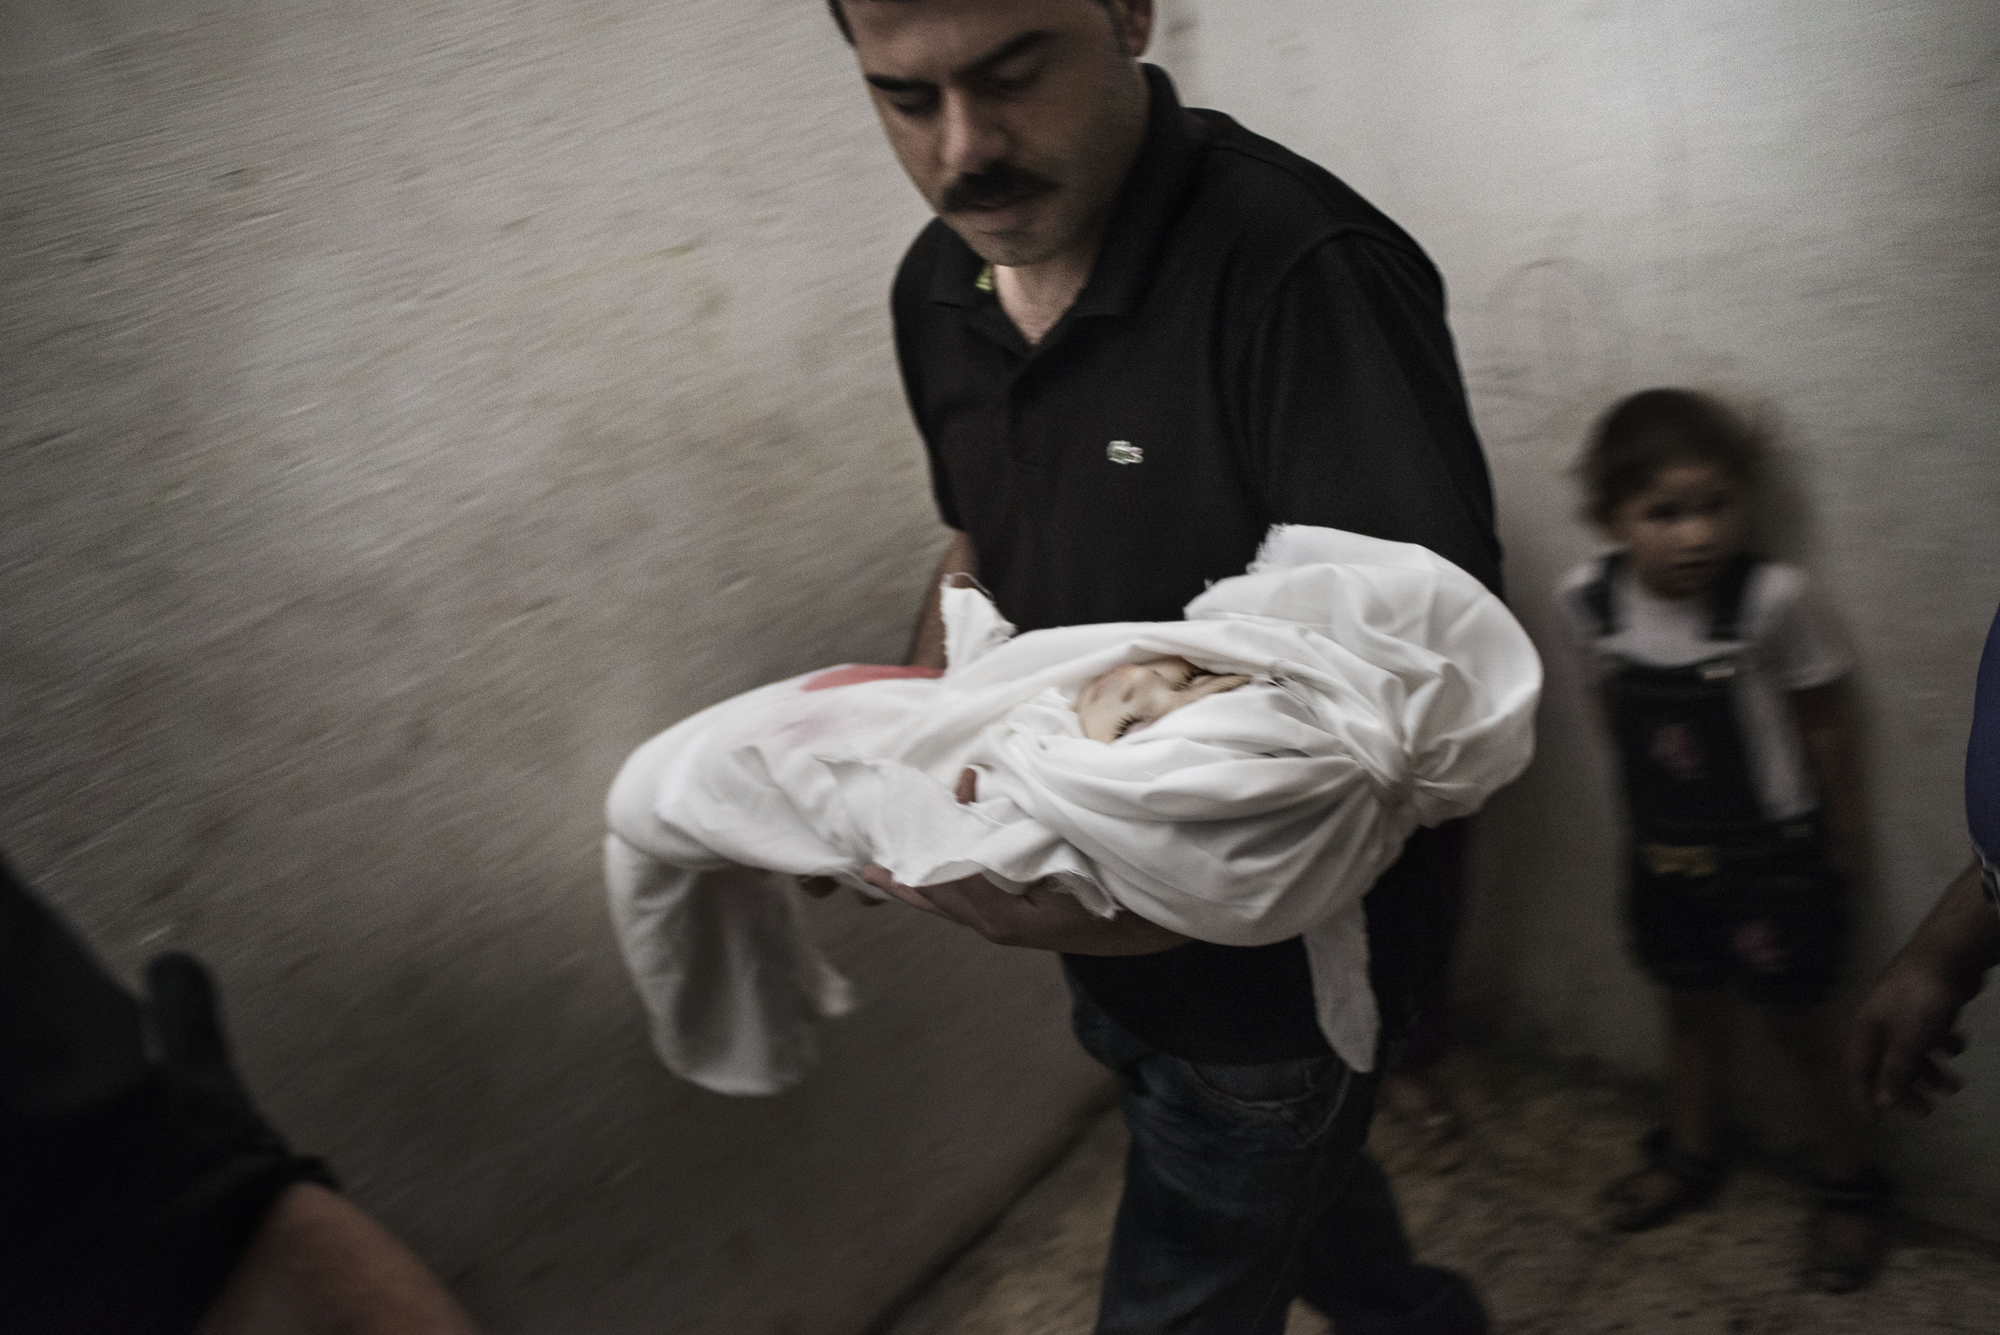 The father of 18-month-old Razel Netzlream, who was fatally wounded during an air strike, carries her body right before her funeral in Rafah, Gaza Strip, on July 18, 2014 (Alessio Romenzi)